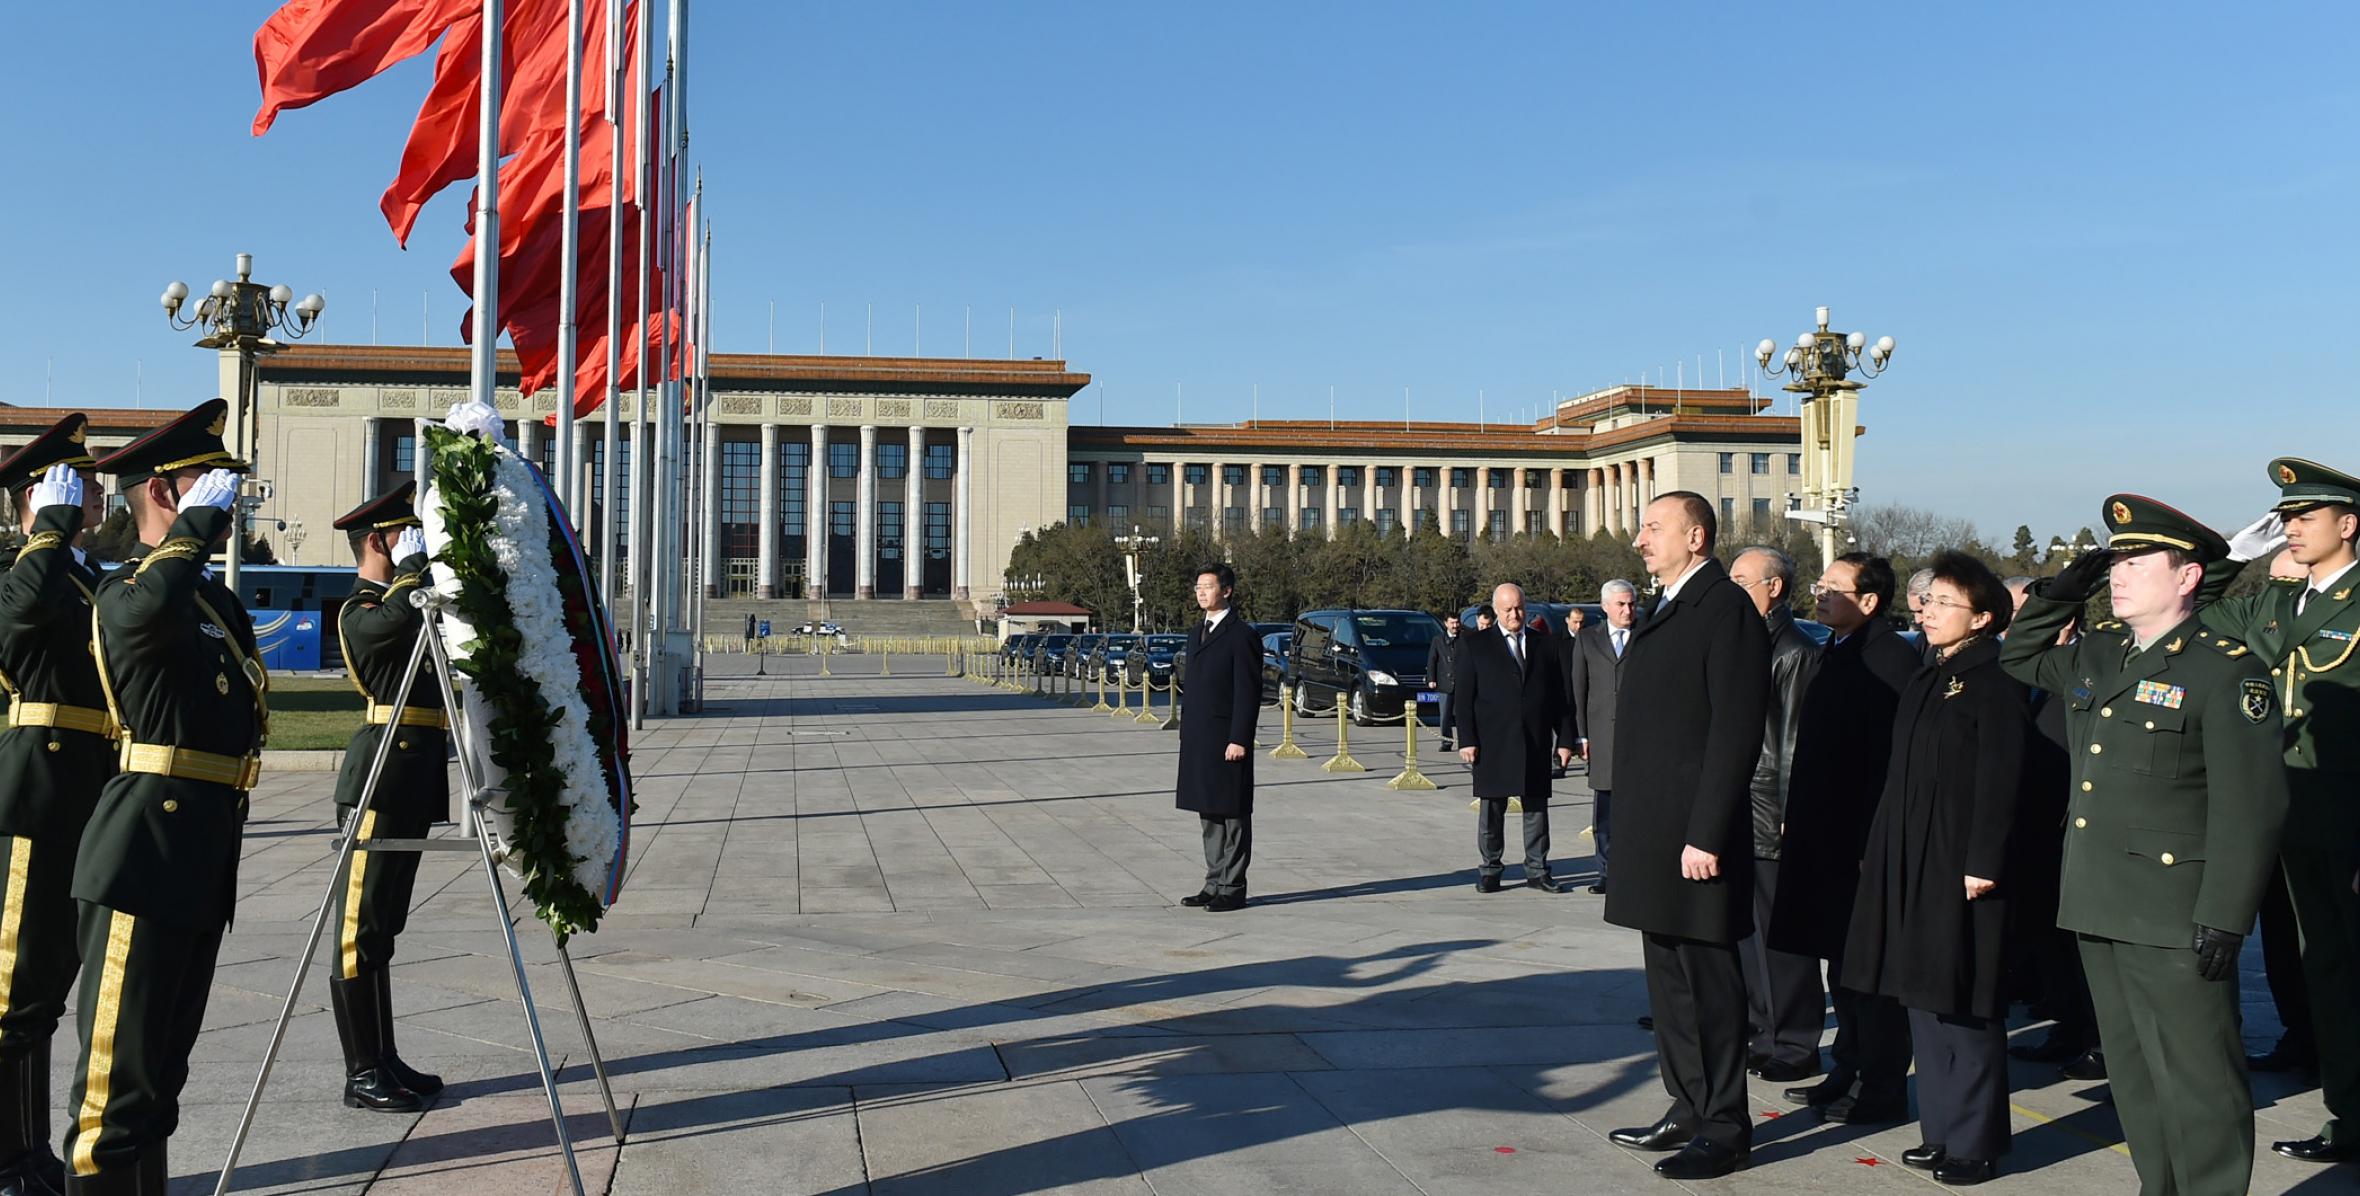 Ilham Aliyev visited the Monument to the People's Heroes in Beijing